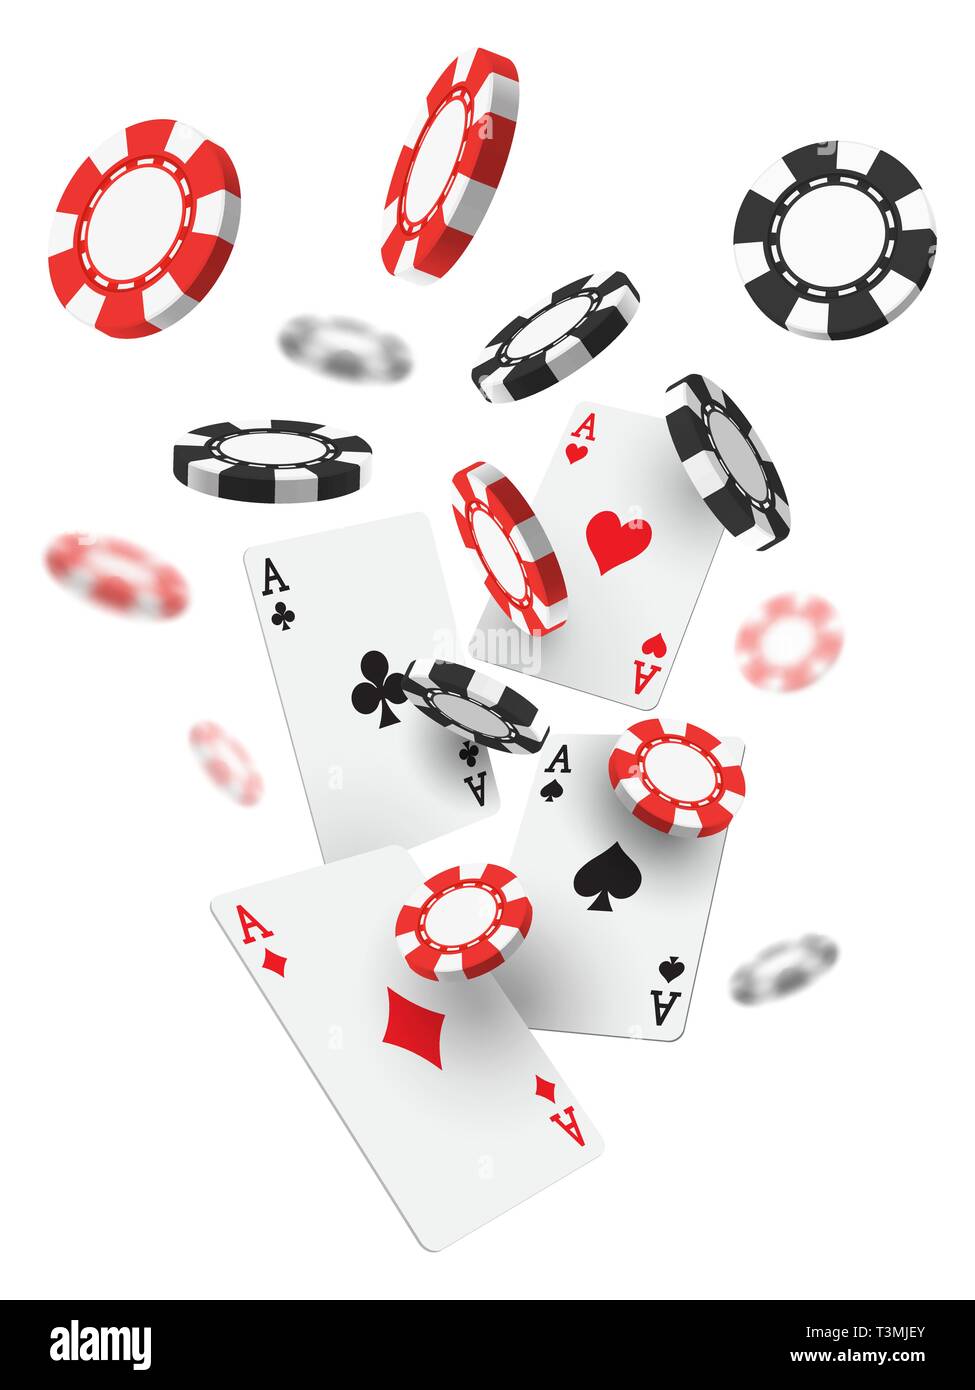 Flying realistic or 3d casino chips and aces cards Stock Vector